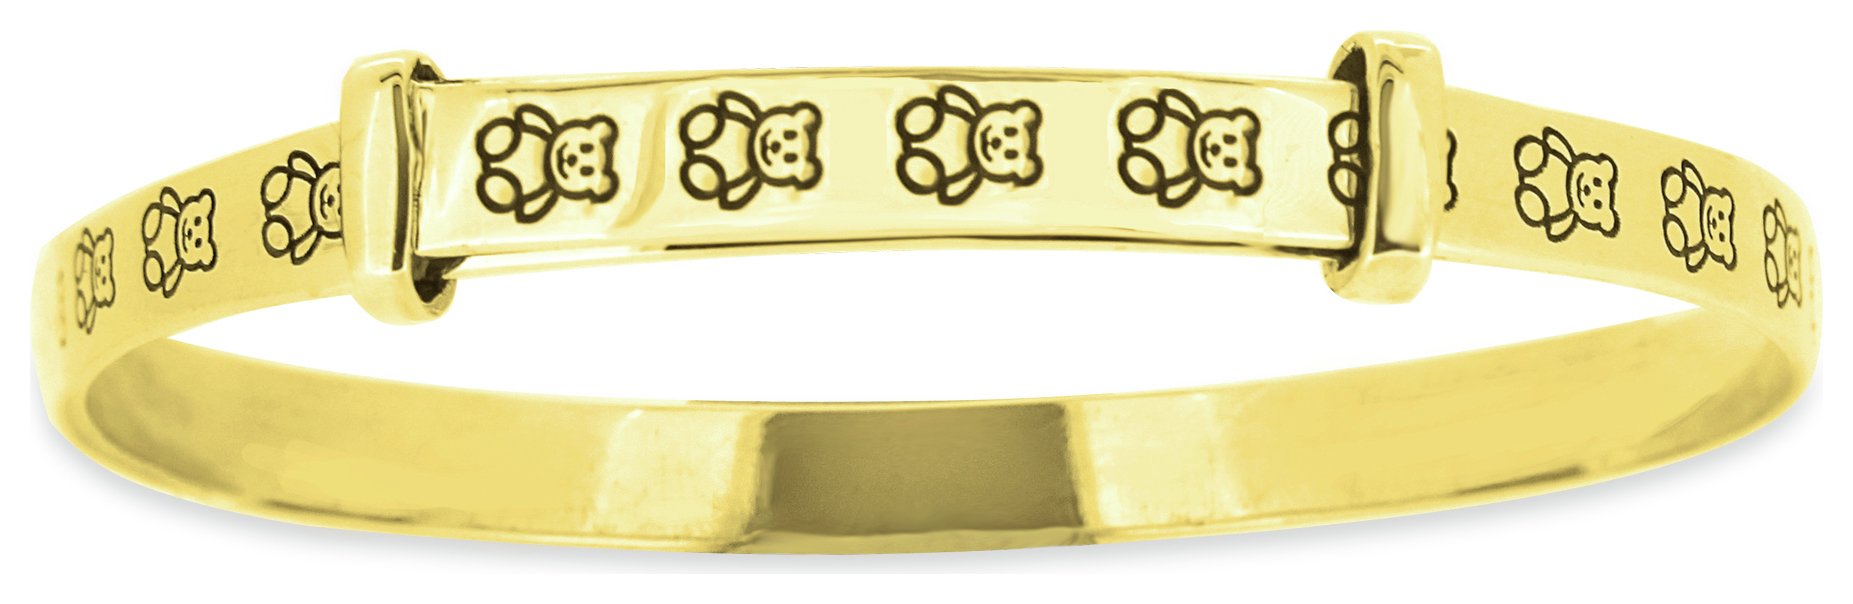 Revere Kid's 9ct Gold Plated Silver Teddy Bangle 0-18 Month